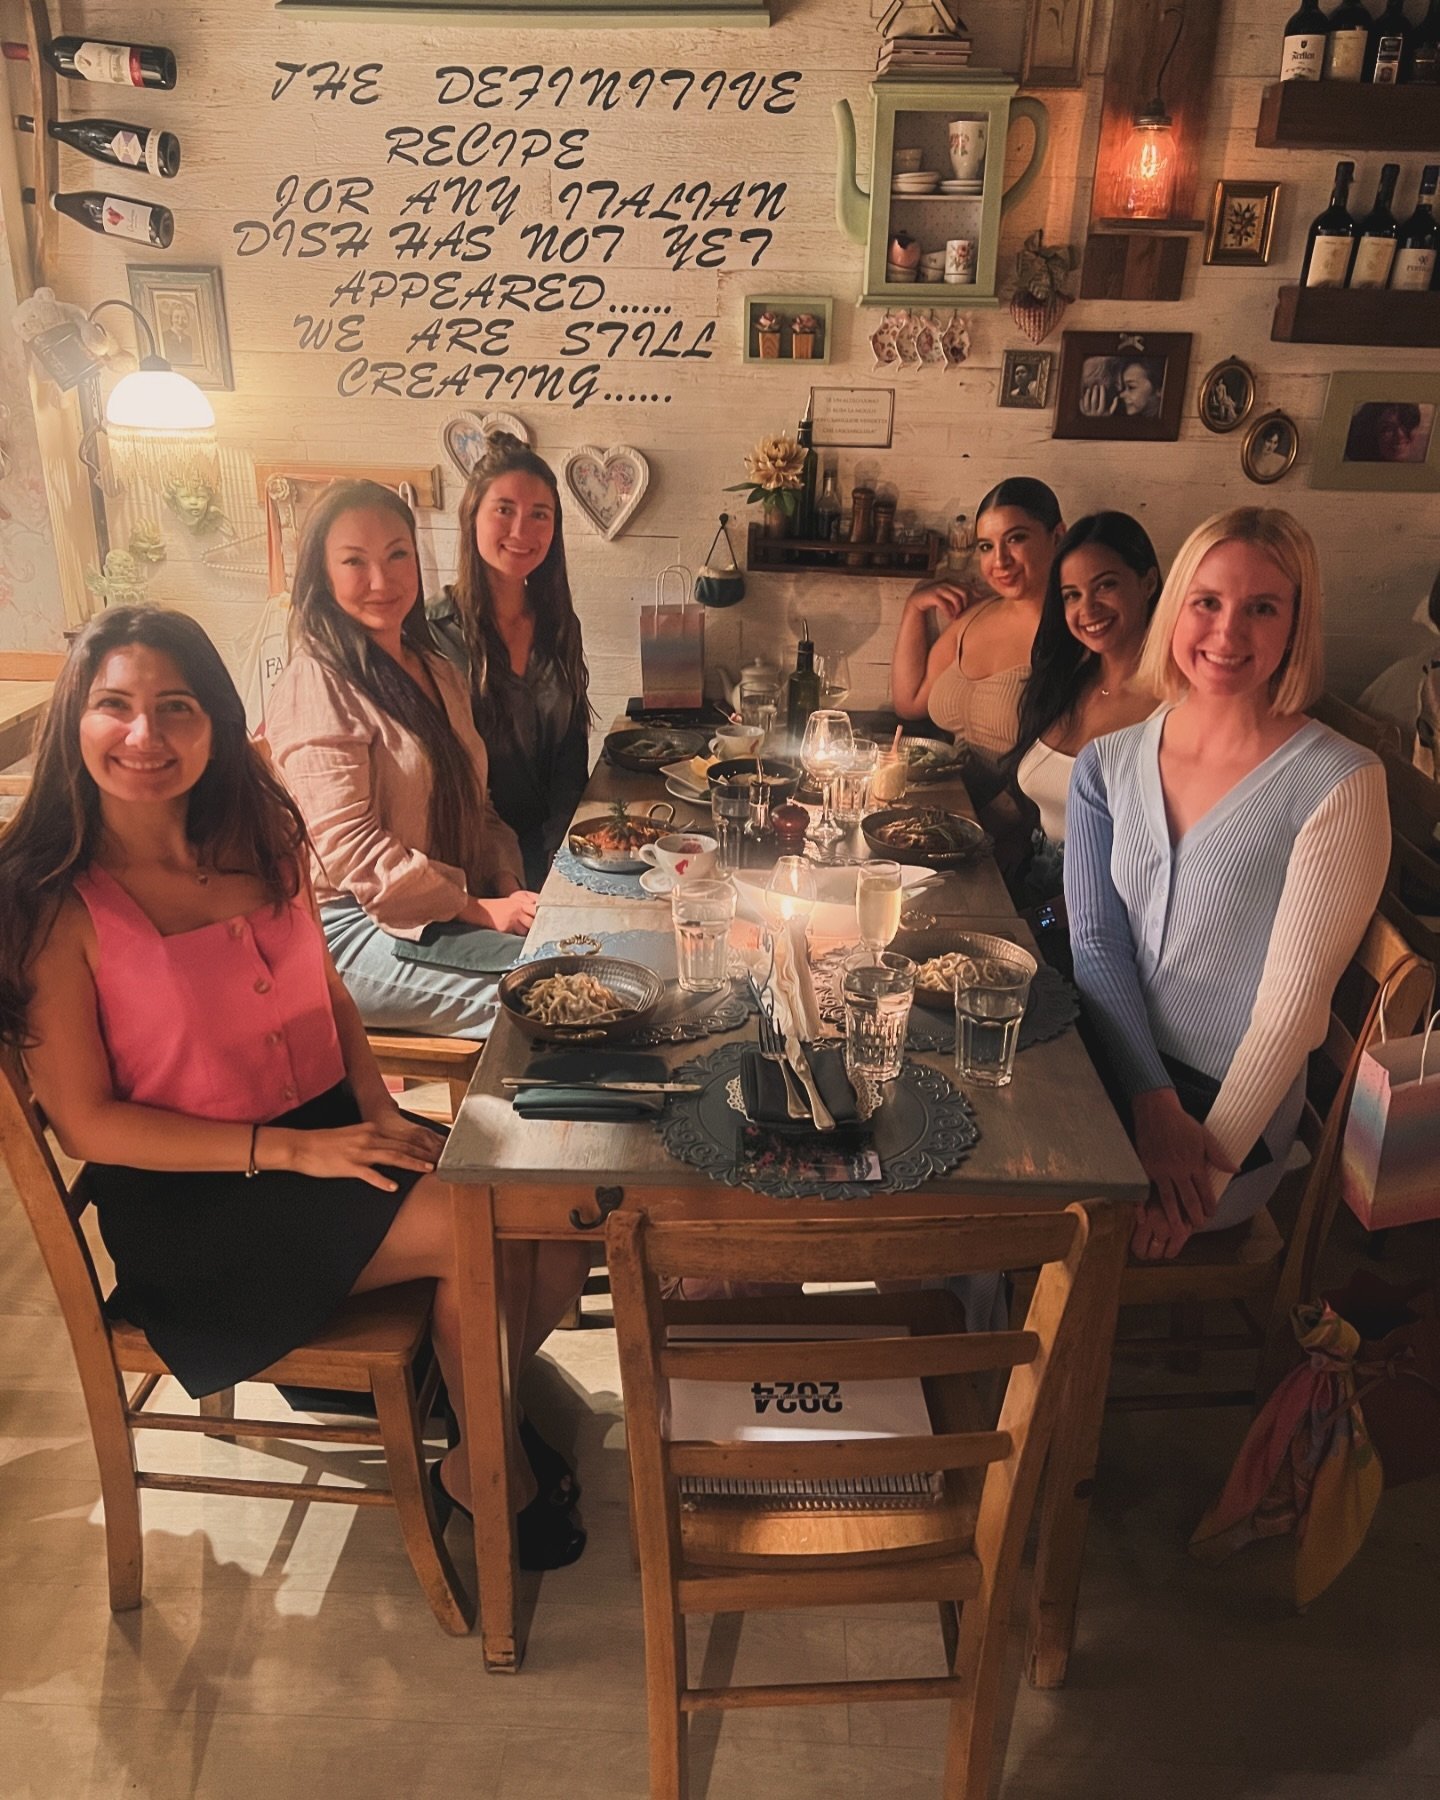 Reflecting on moments like these fills my heart with warmth. Here&rsquo;s a glimpse of our incredible women&rsquo;s social club coming together, sharing laughter, stories, and creating memories that last a lifetime. It&rsquo;s not just an event; it&r